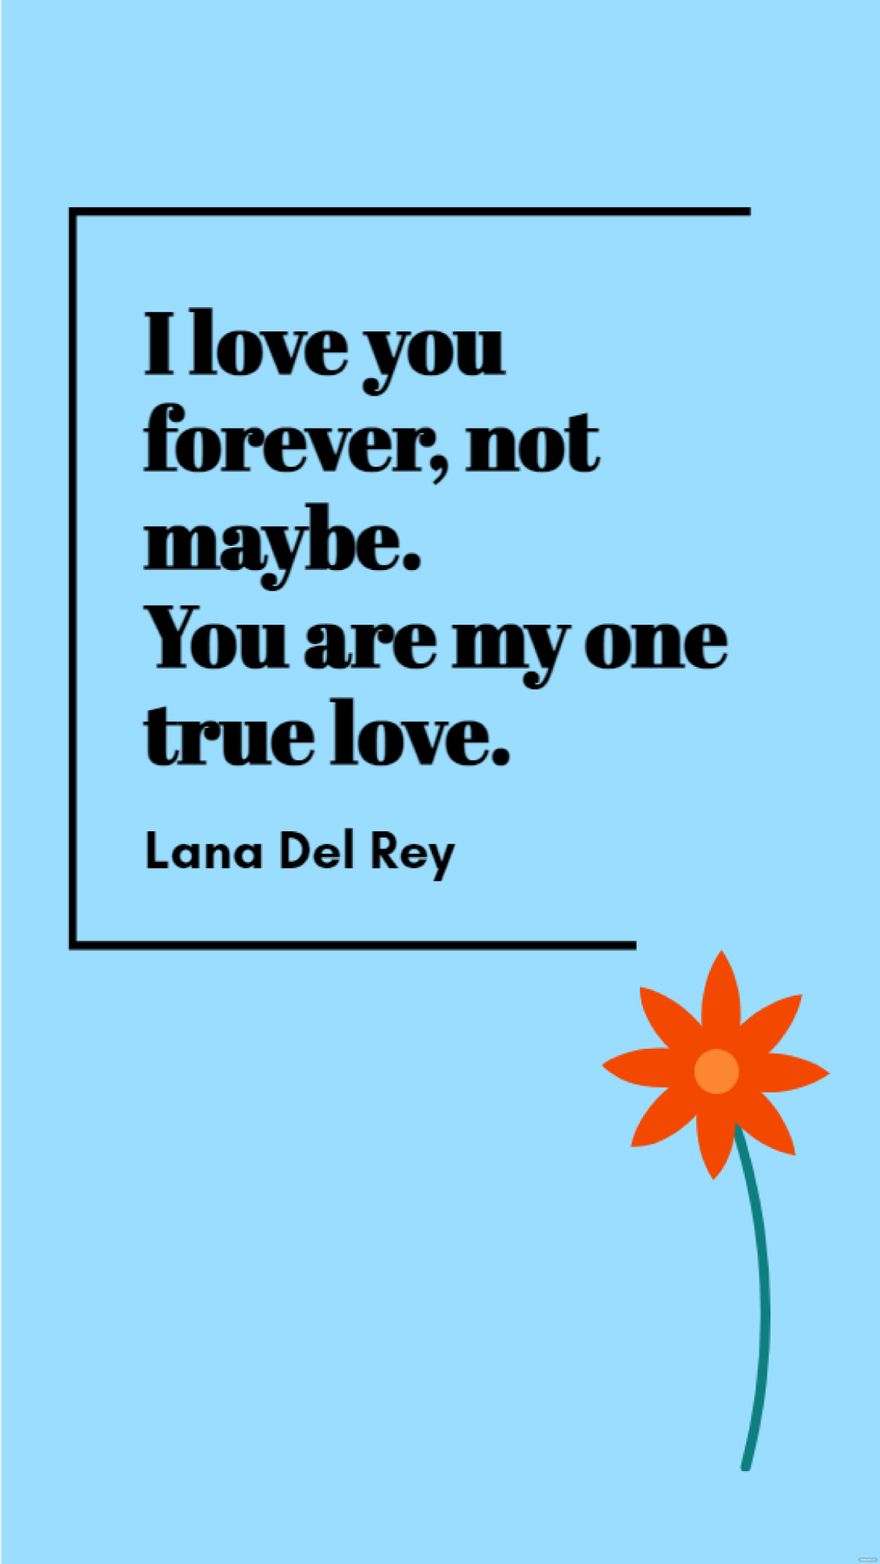 Free Lana Del Rey - I love you forever, not maybe. You are my one true love.